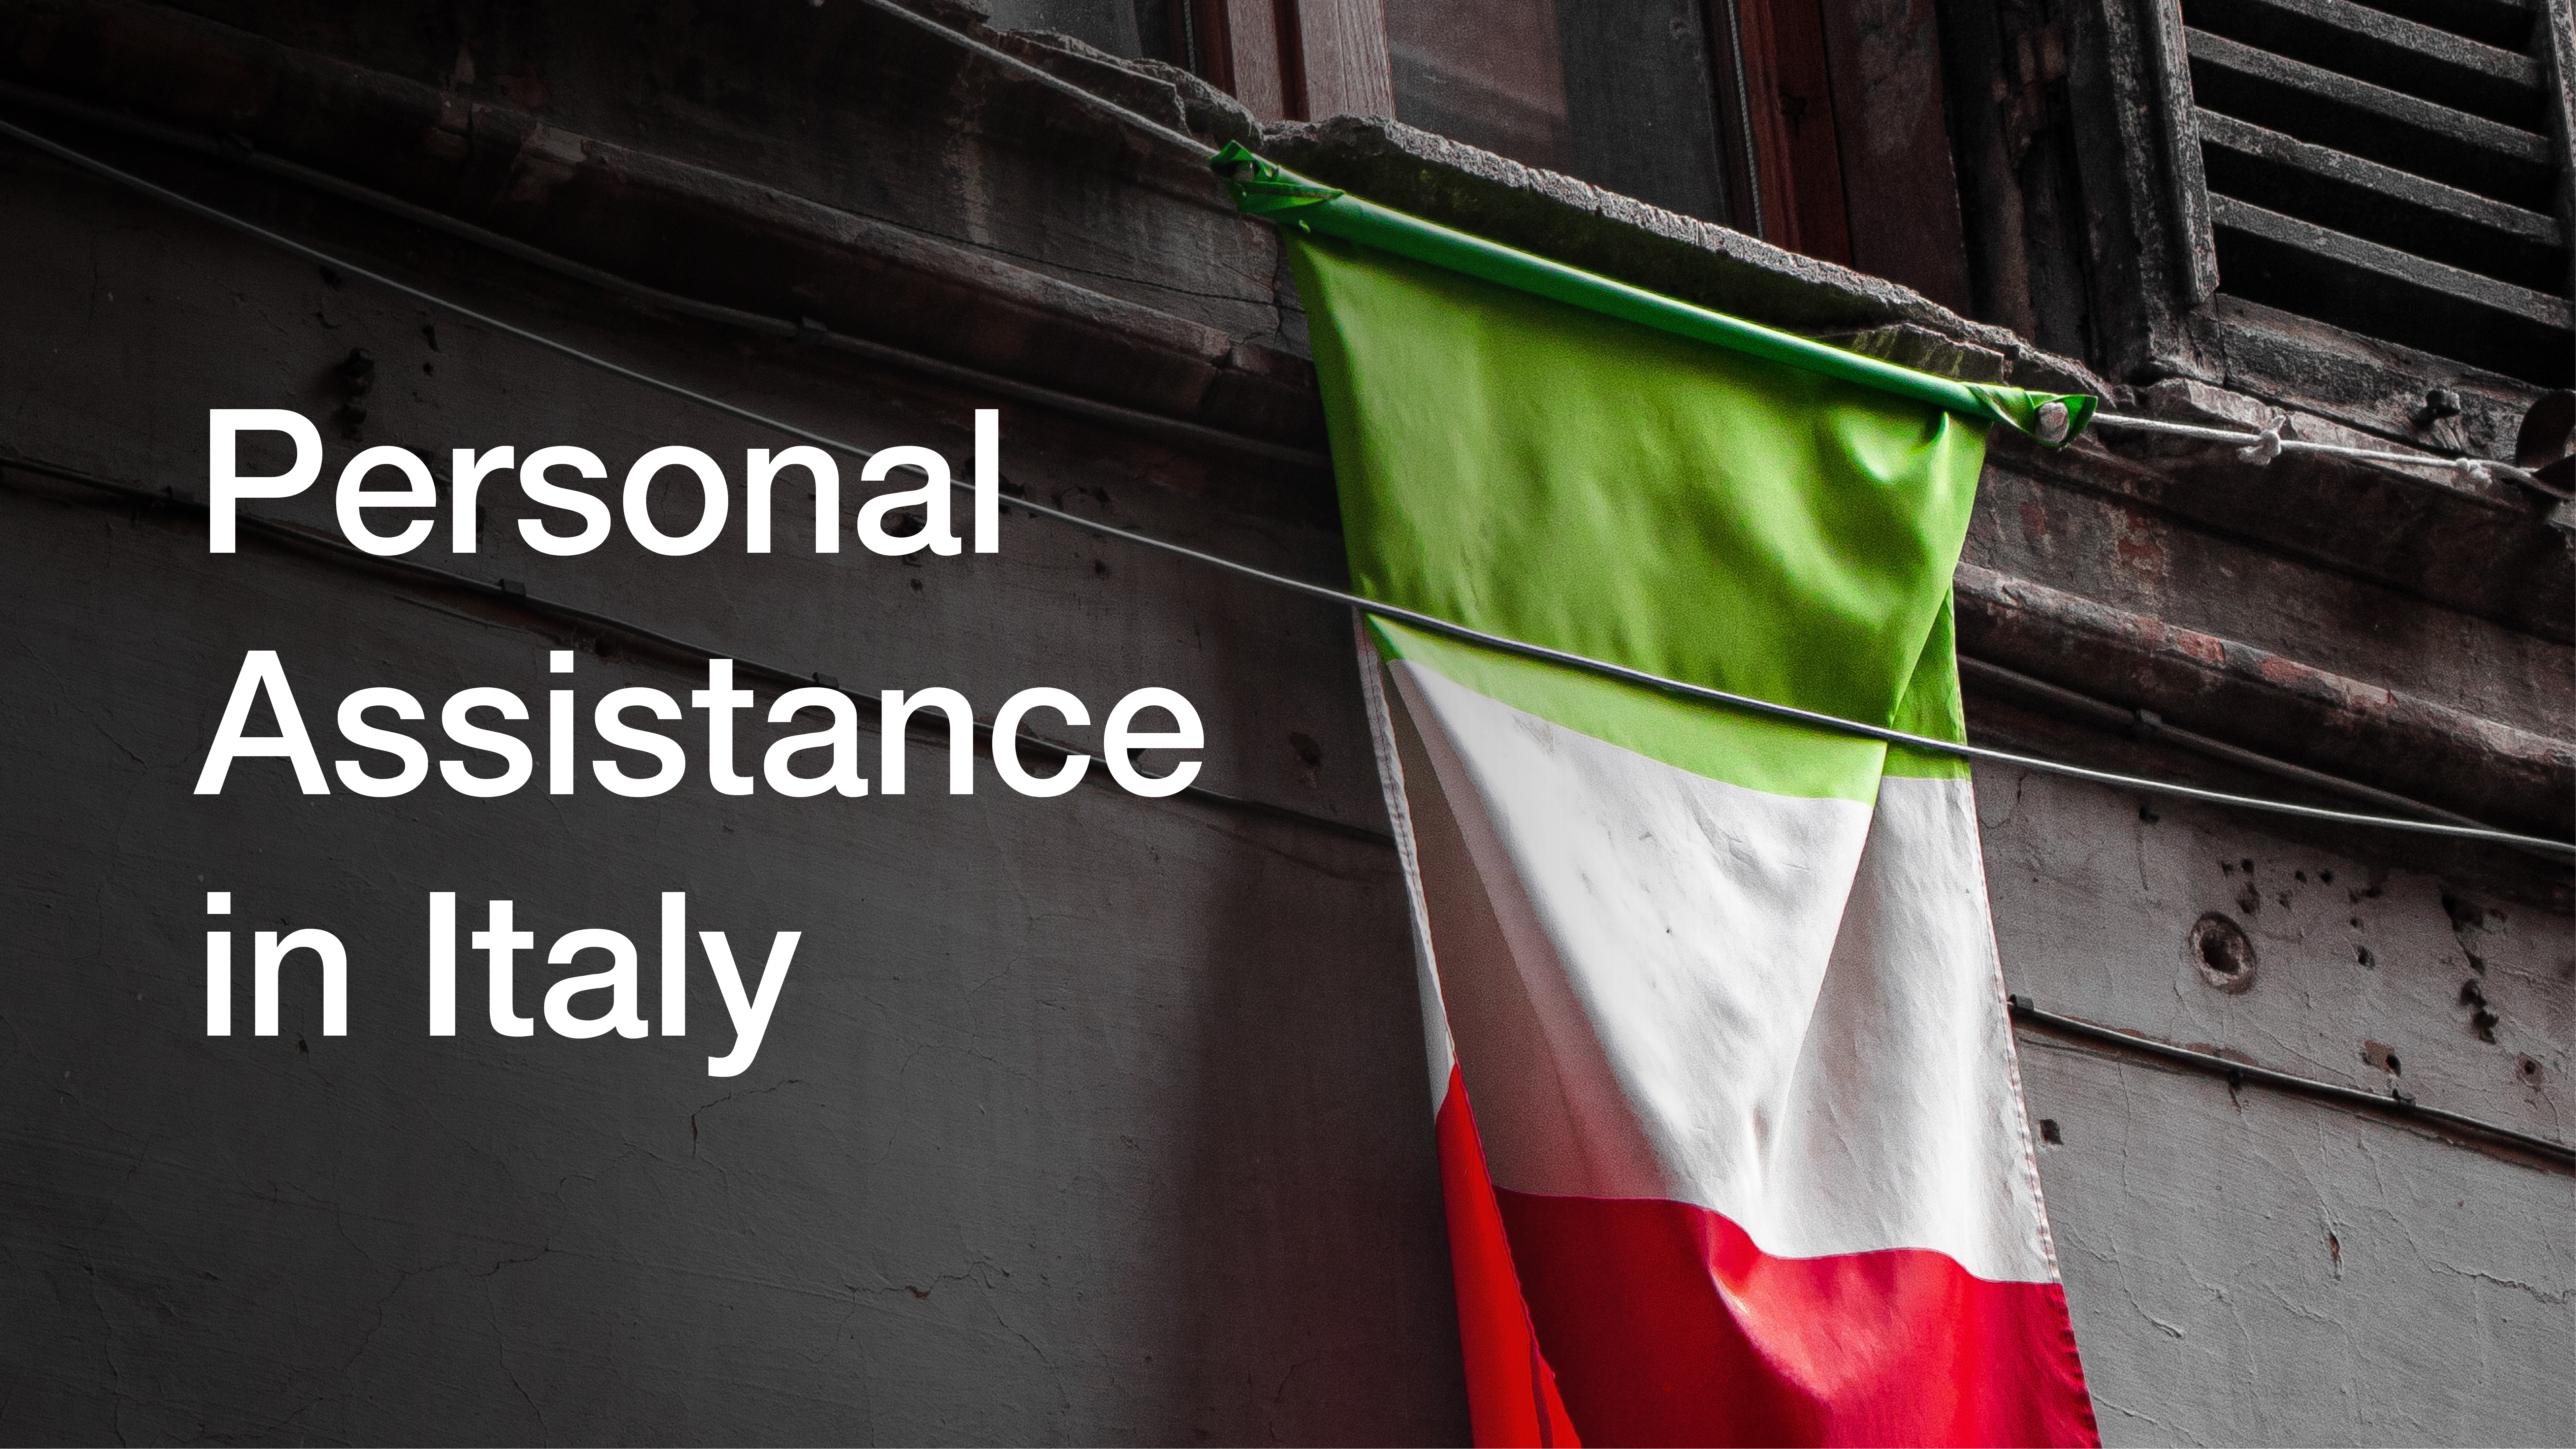 A look at Personal Assistance in Italy